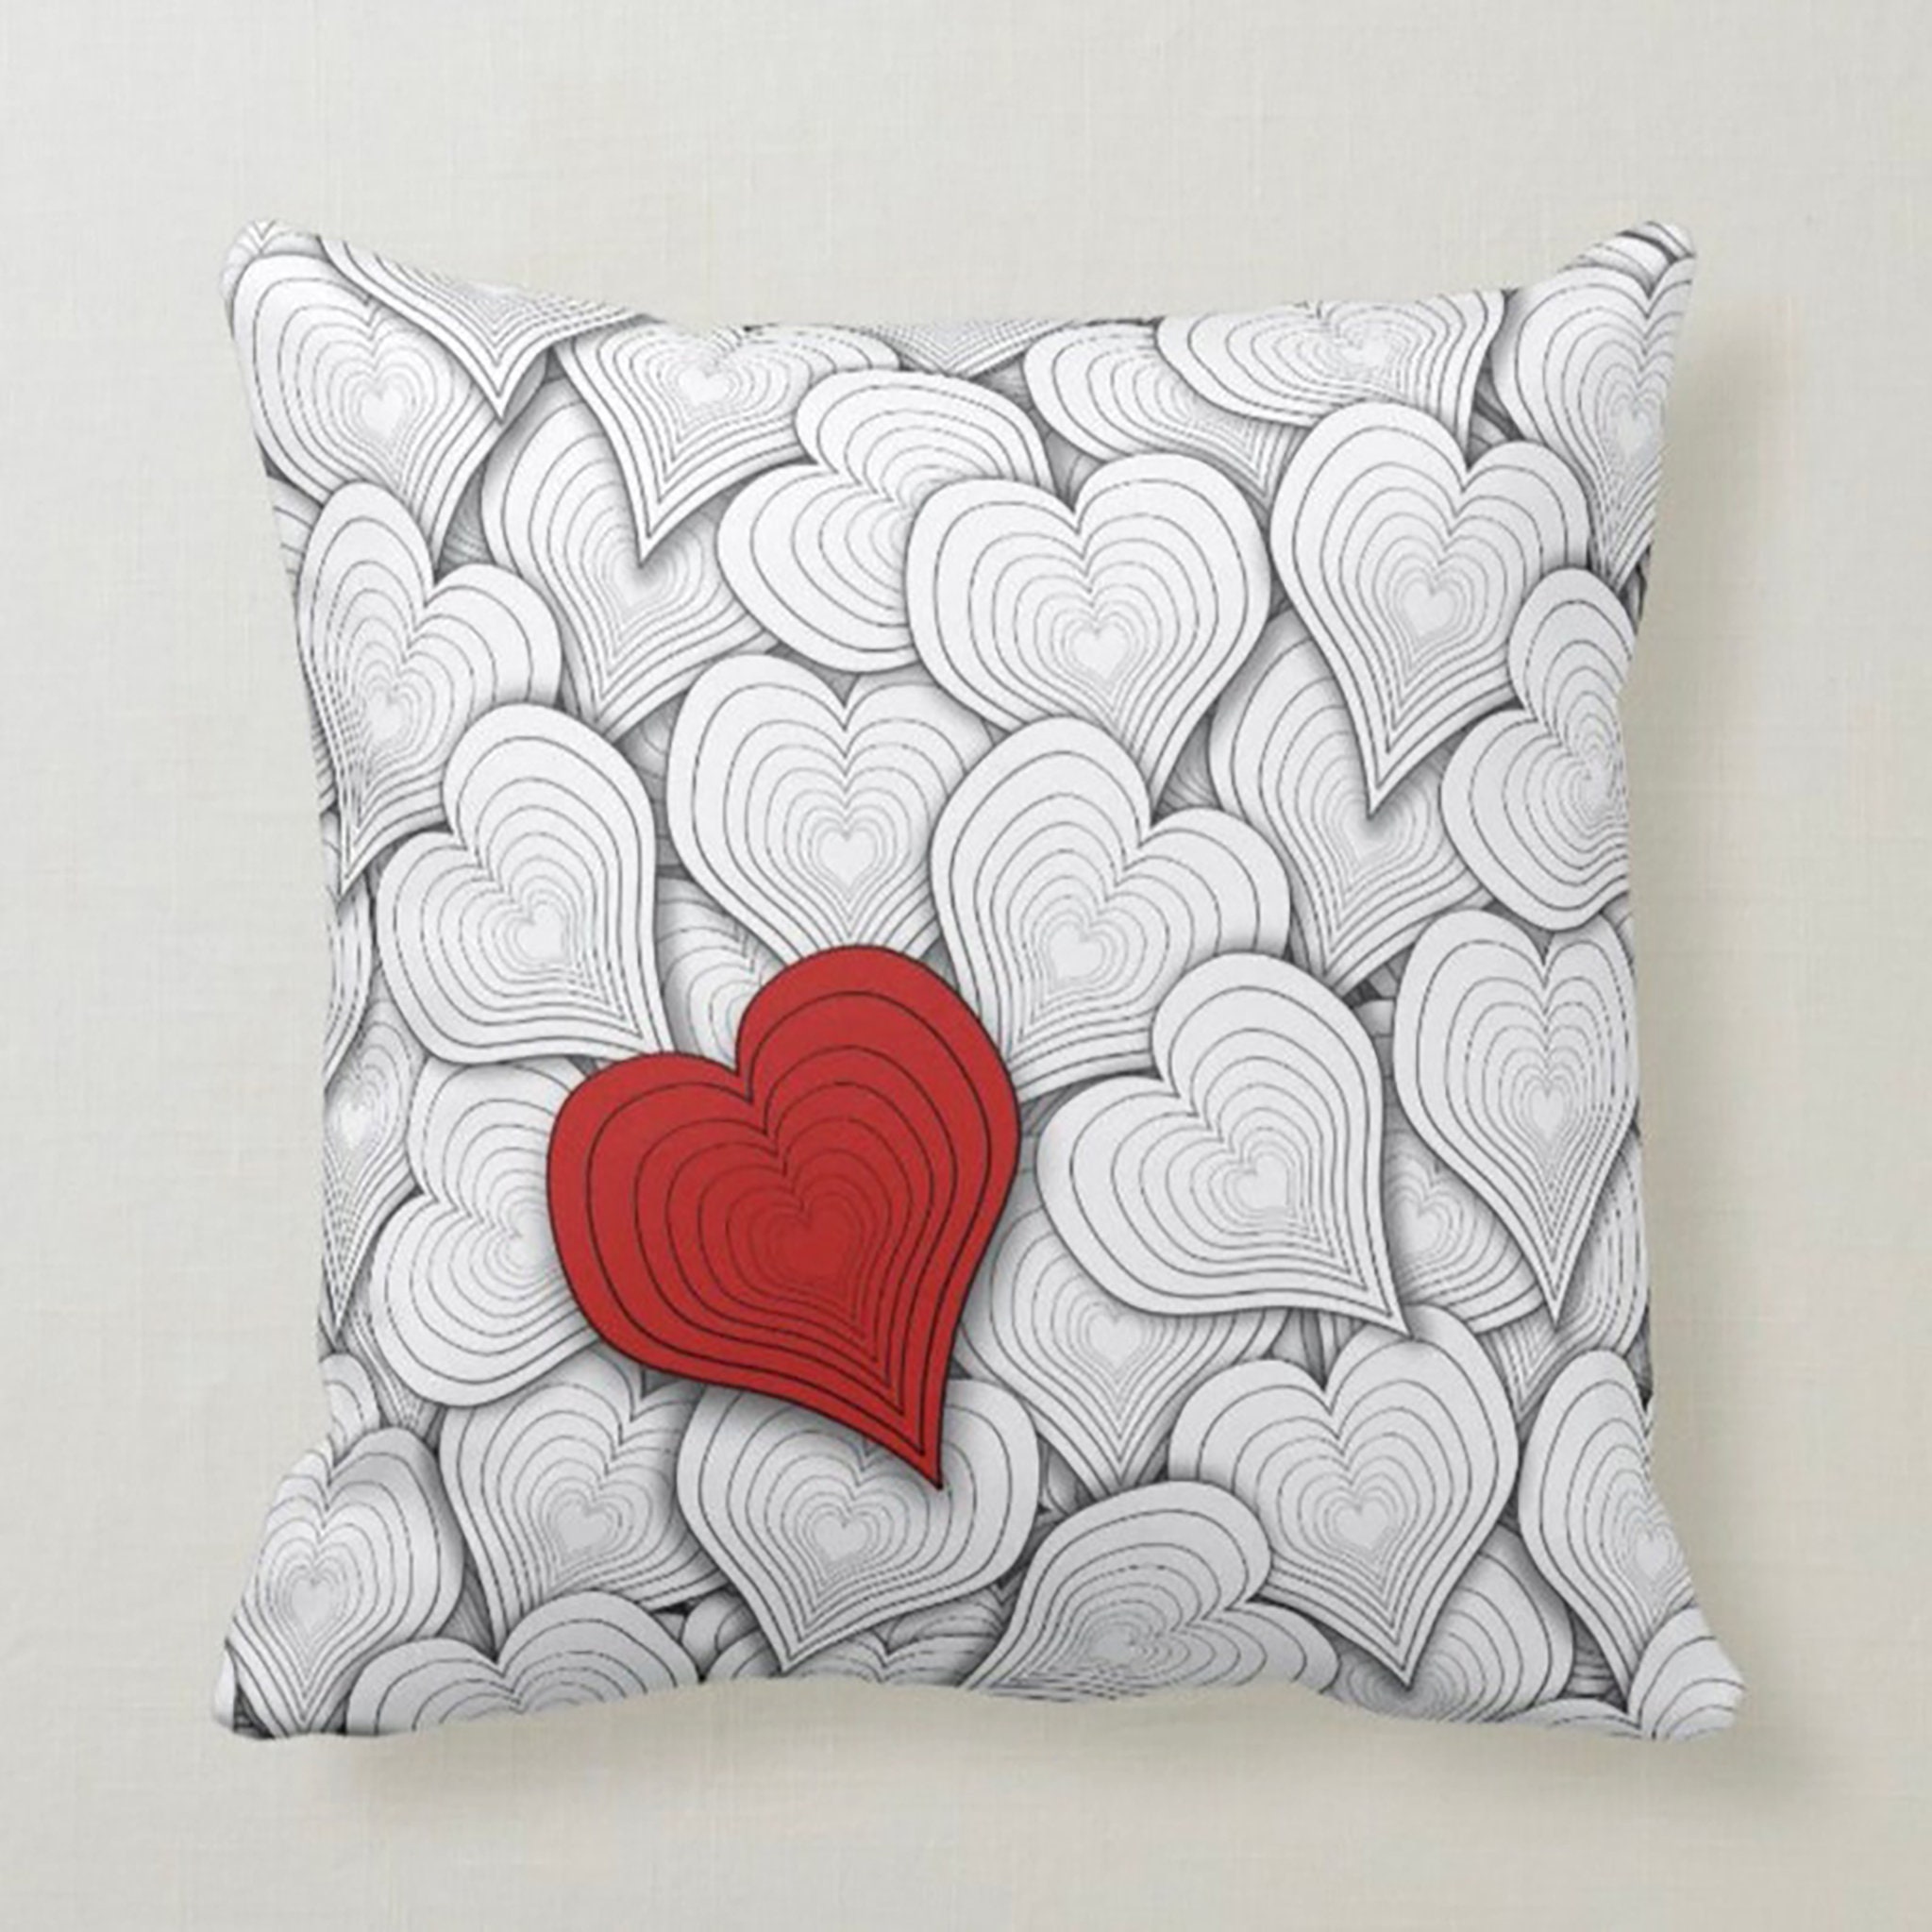  Aeiwjoi Gifts for Boyfriend Gifts from Girlfriend Romantic  Throw Pillow Cover Gift Boyfriend Birthday Gifts I Love You Throw  Pillowcase Love Cushion Covers (Boyfriend) : Home & Kitchen